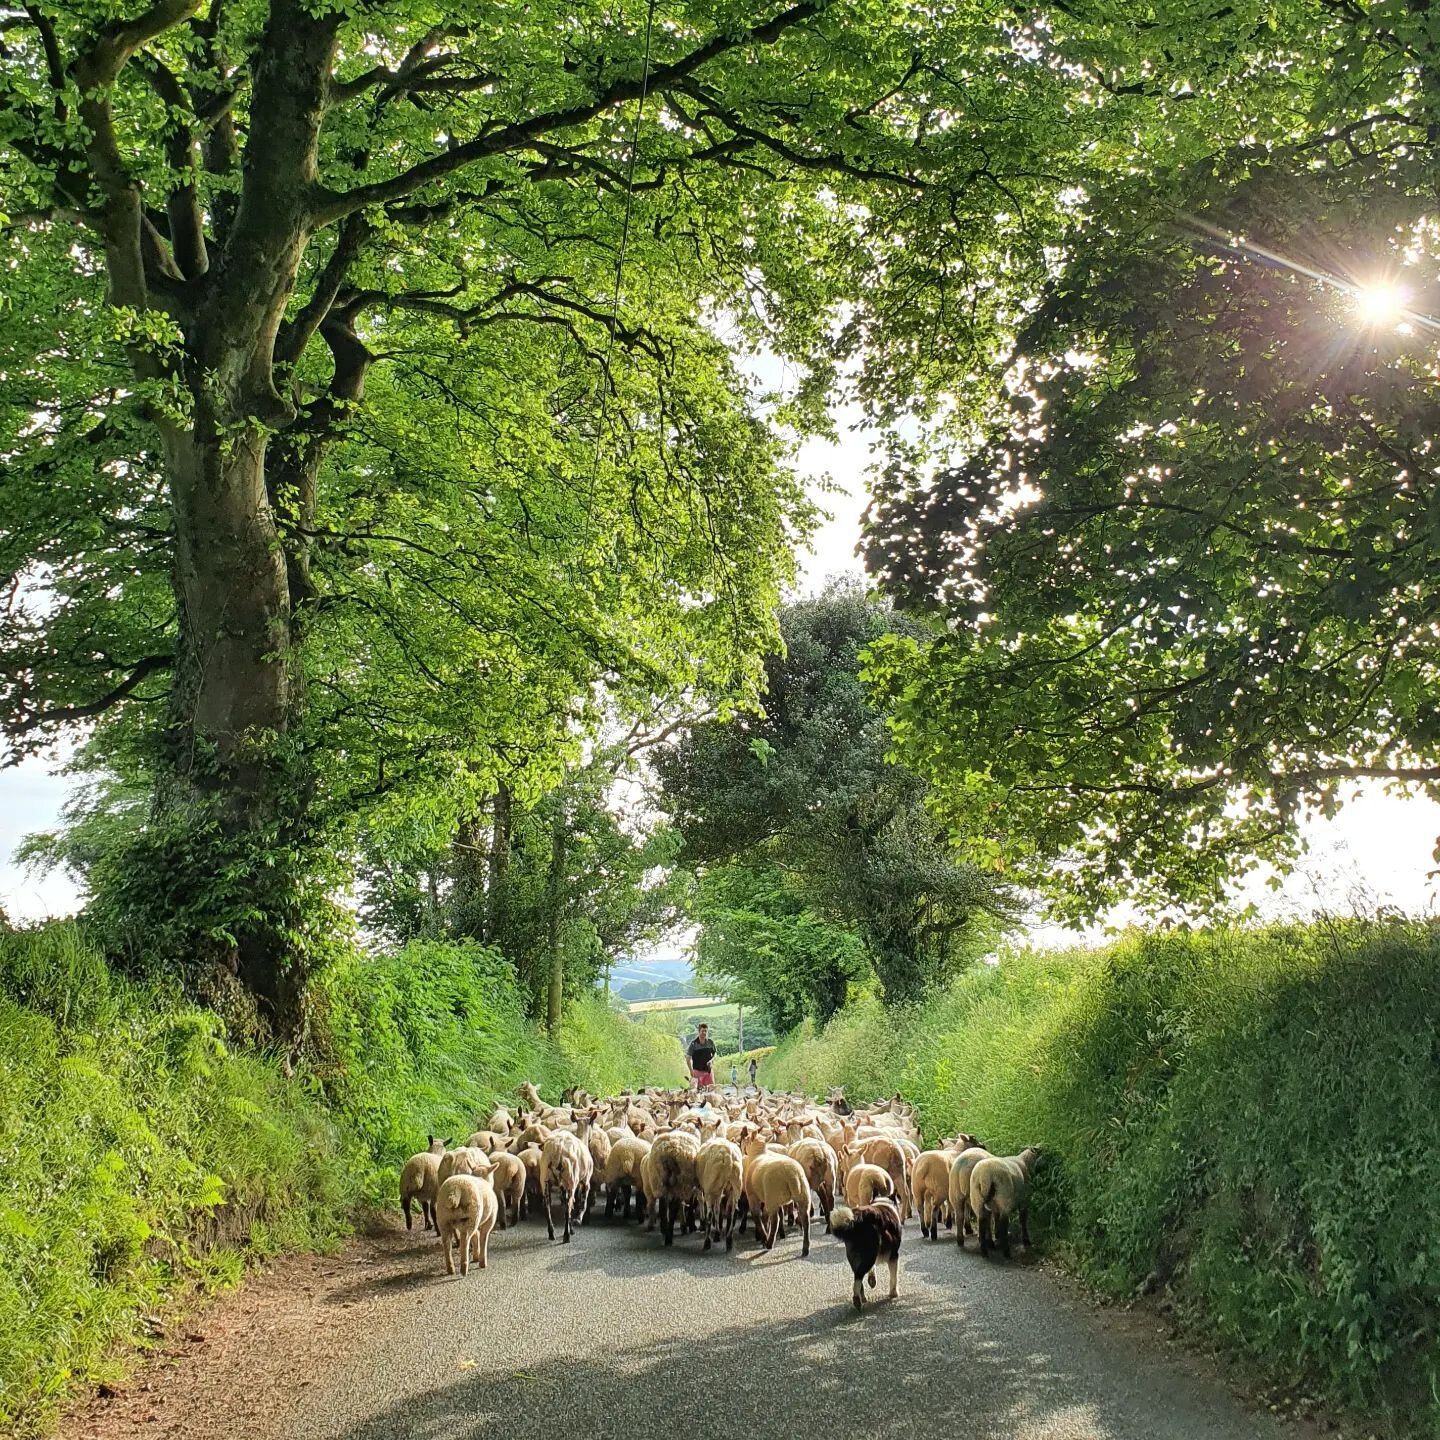 A view down our lane which always makes me smile.... especially when filled with a flock of noisy sheep!